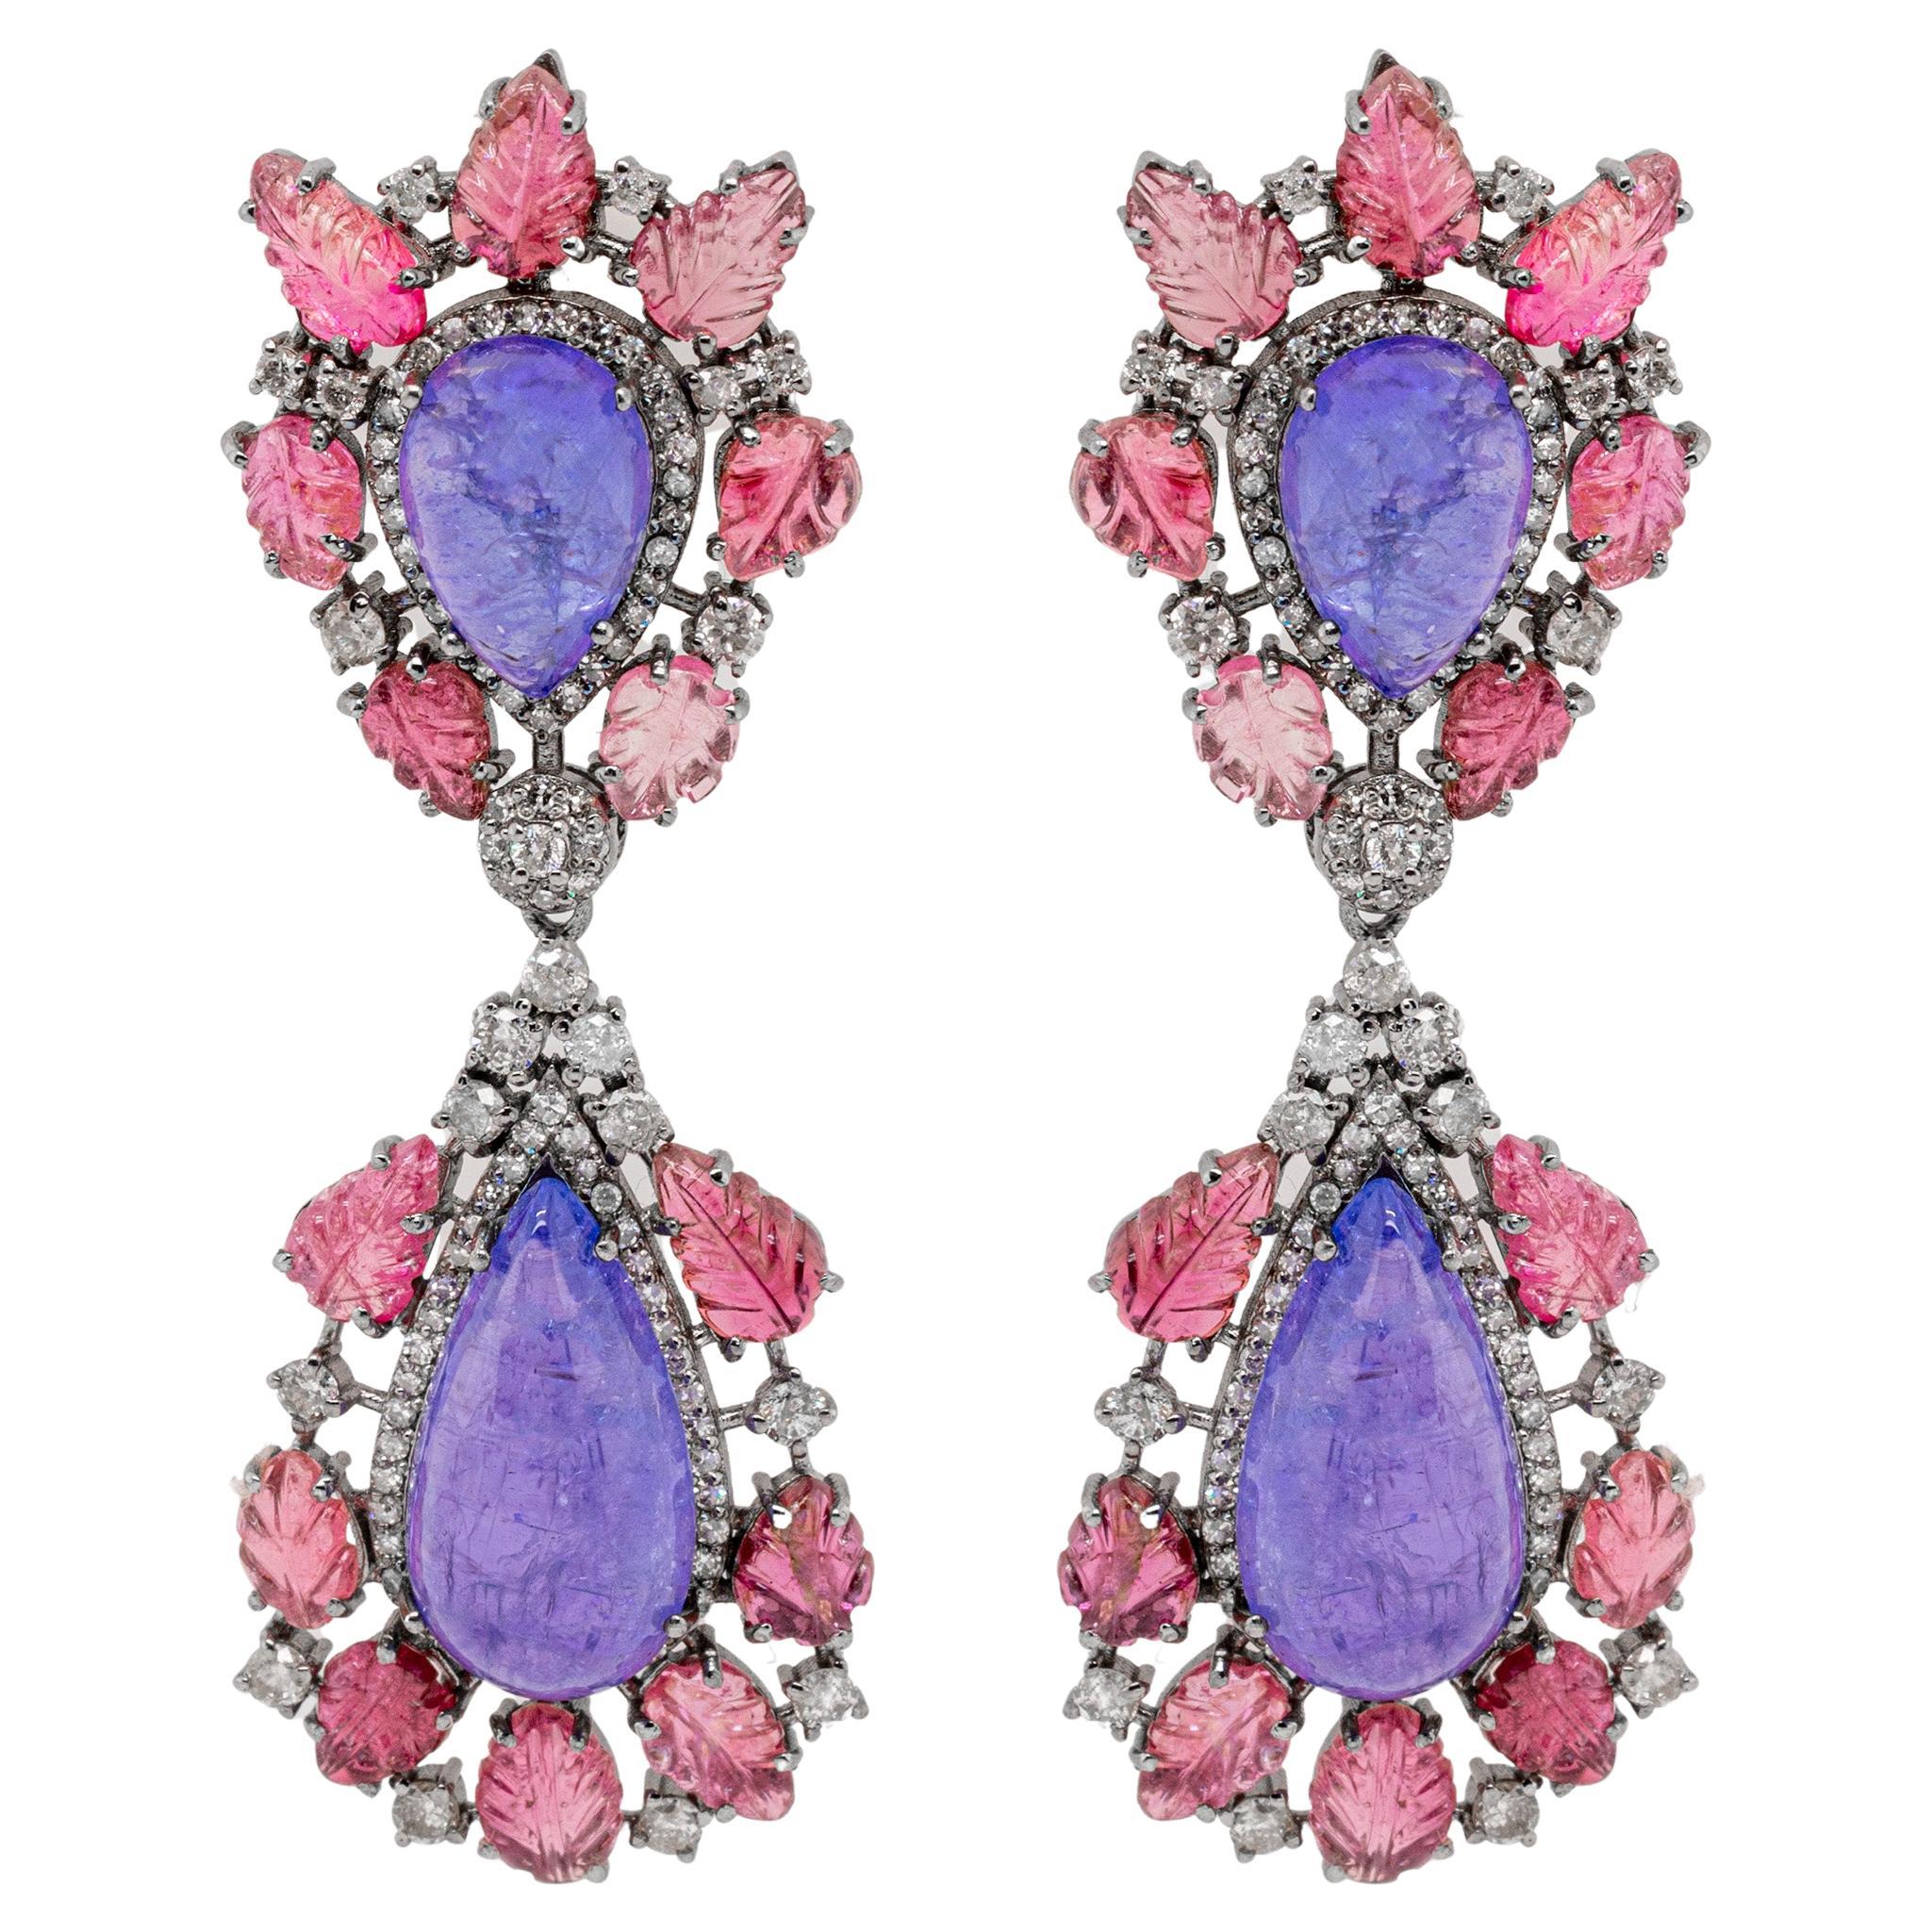 Carved Earrings Featuring Tanzanites Pink Tourmalines and Diamonds Silver